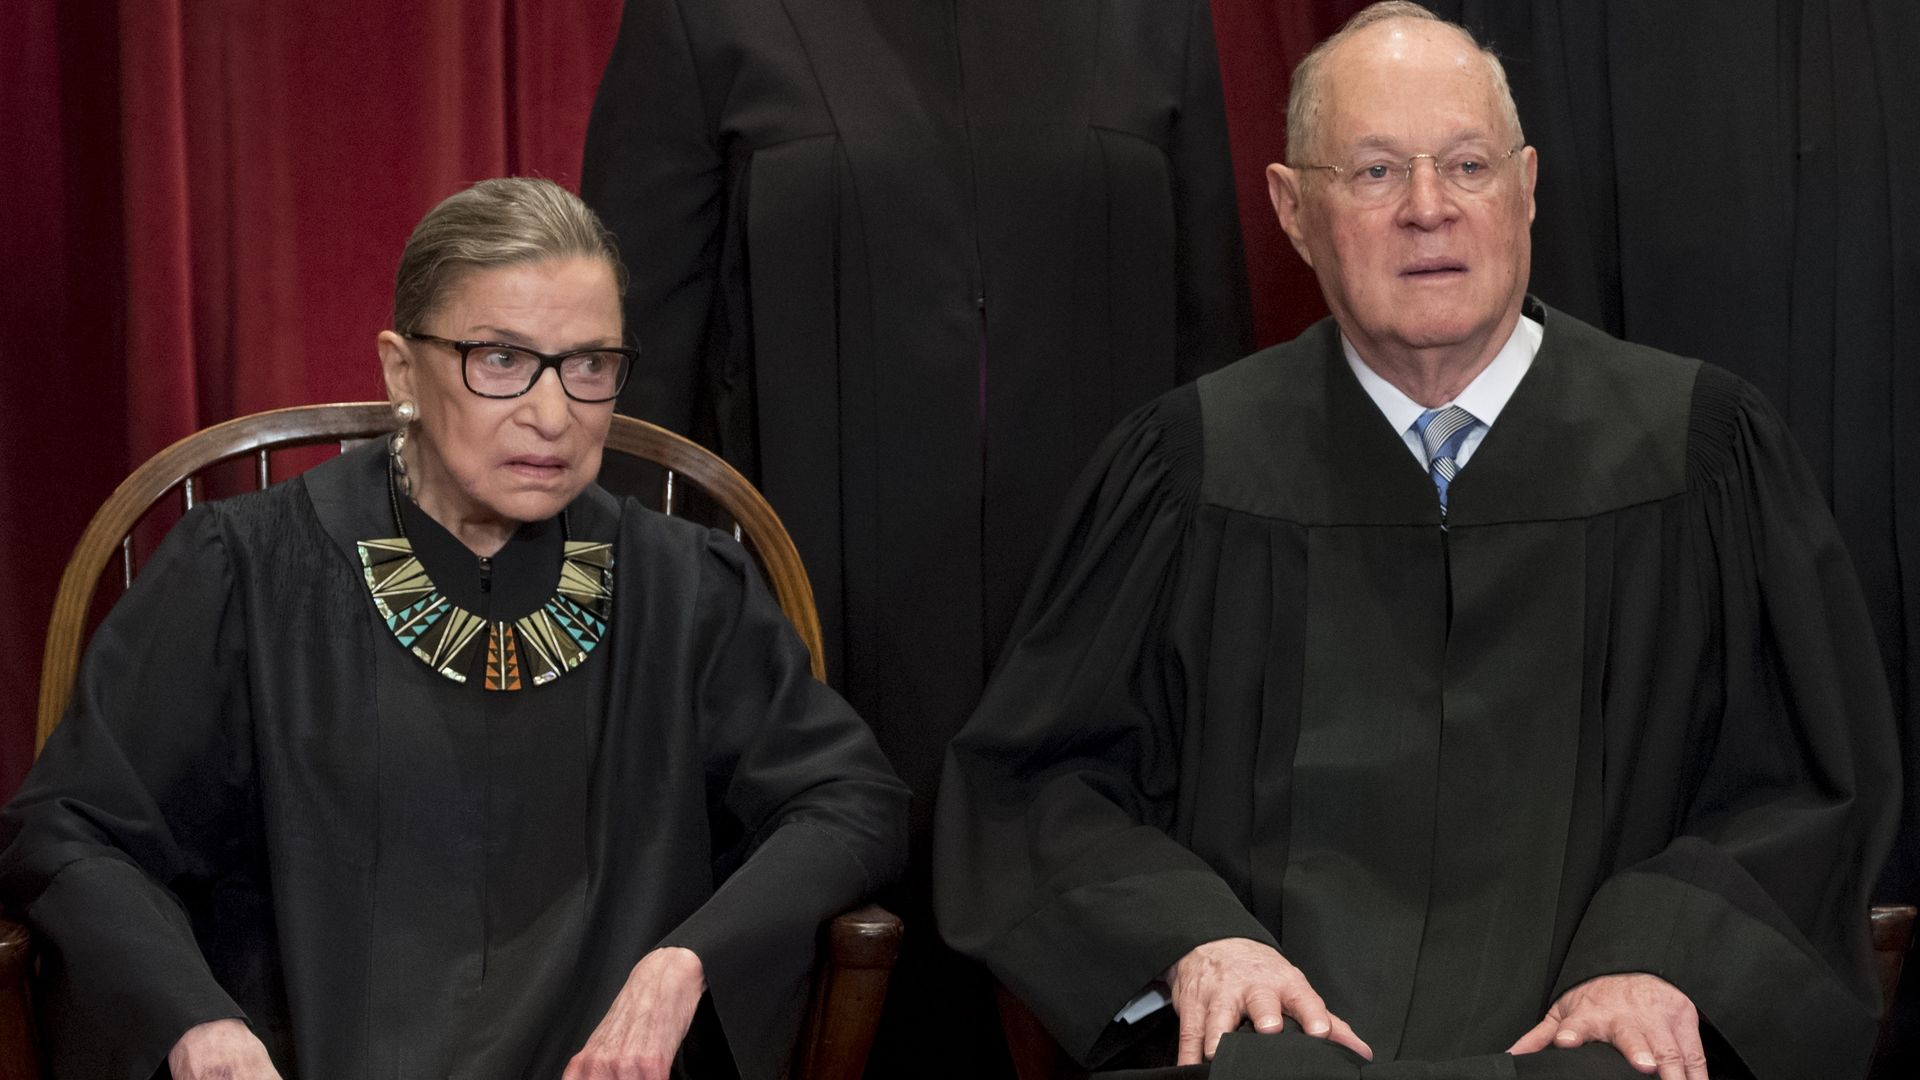 Justices Ruth Bader Ginsburg and Anthony Kennedy